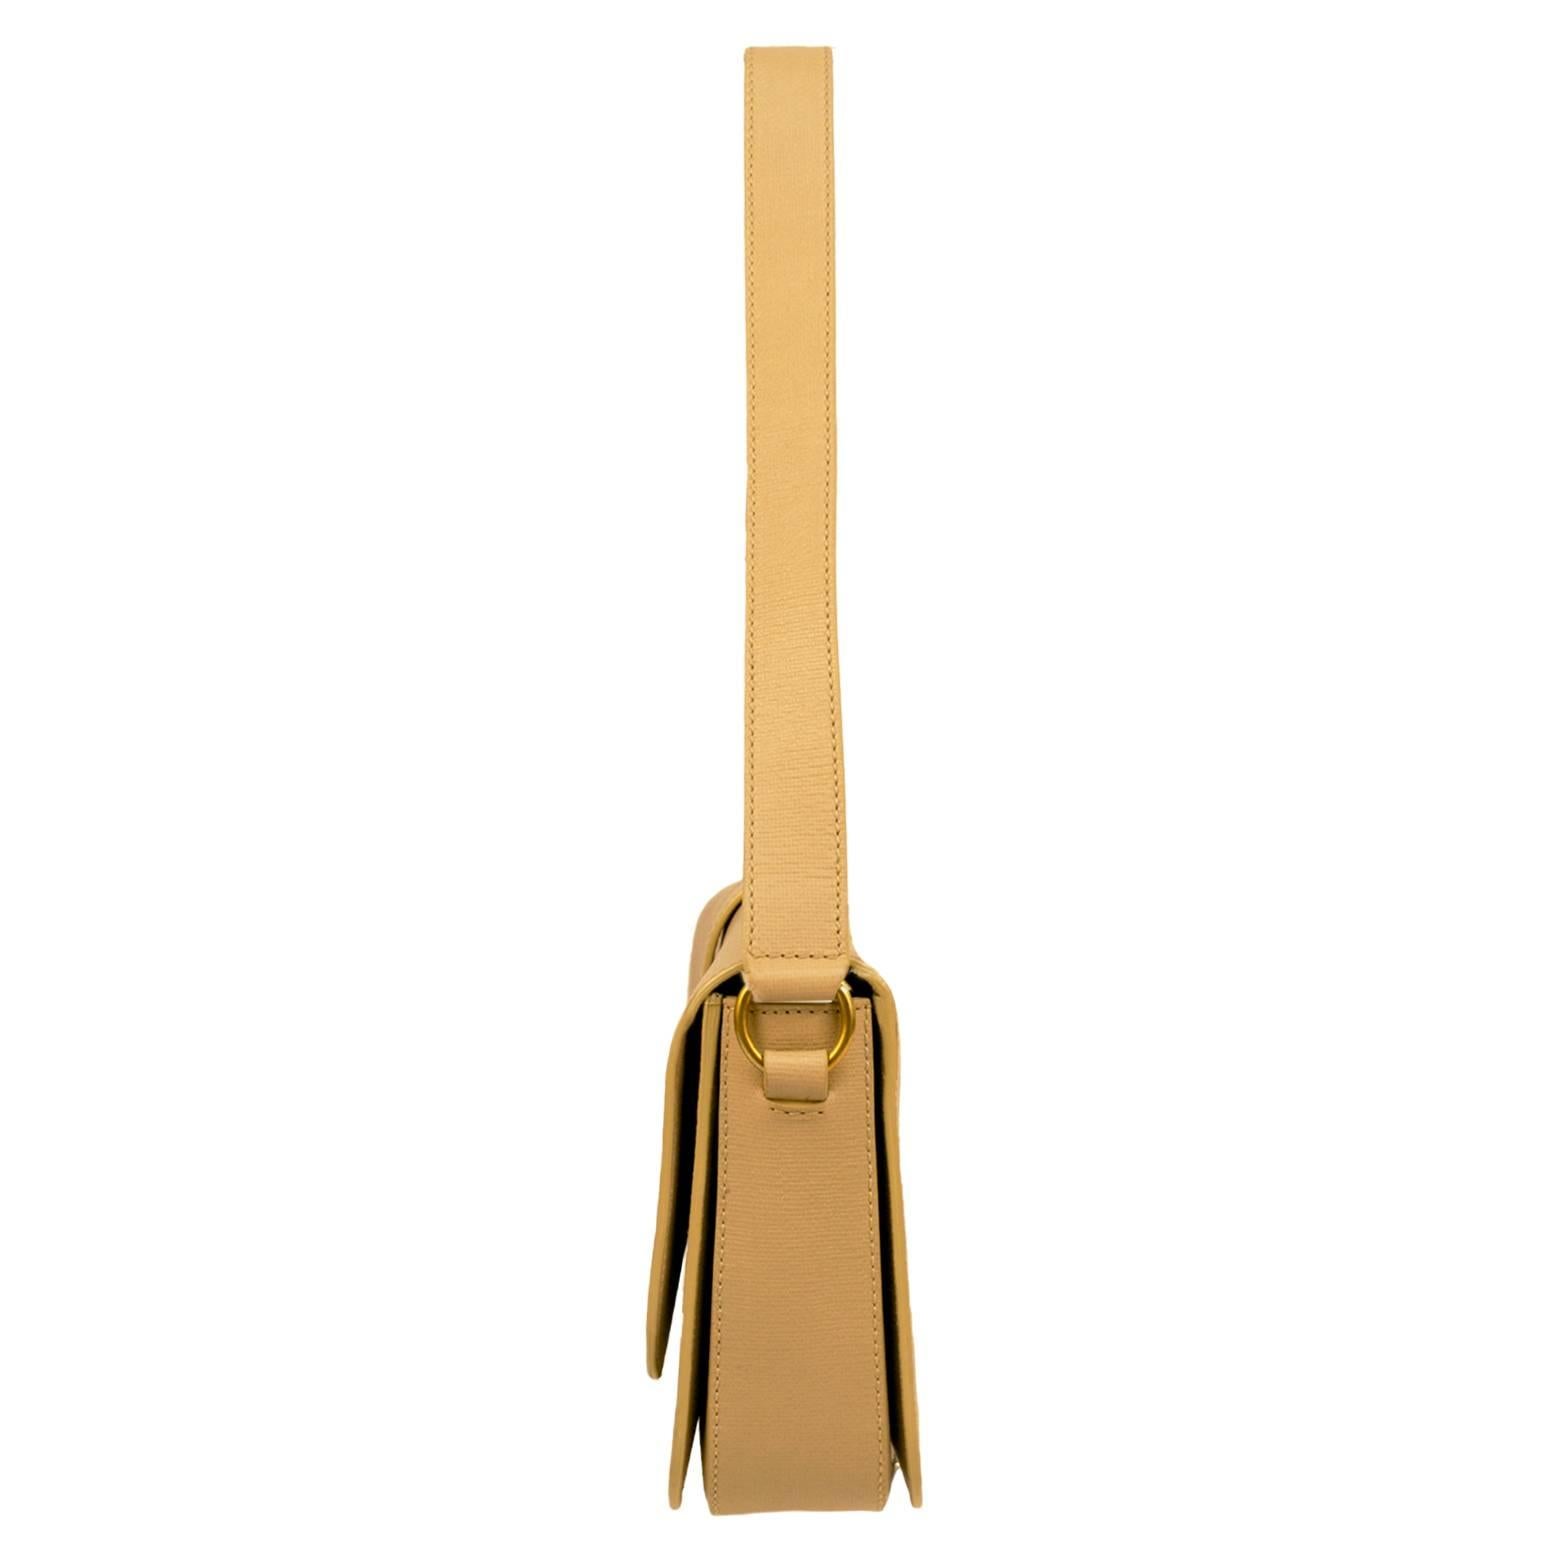 This beautiful Yves Saint Laurent shoulder handbag is a rich neutral camel leather and has a front closure flap. The shoulder strap is thick leather for strength and comfort and is a 9 inch drop. The front buckled includes a Y sculpted in